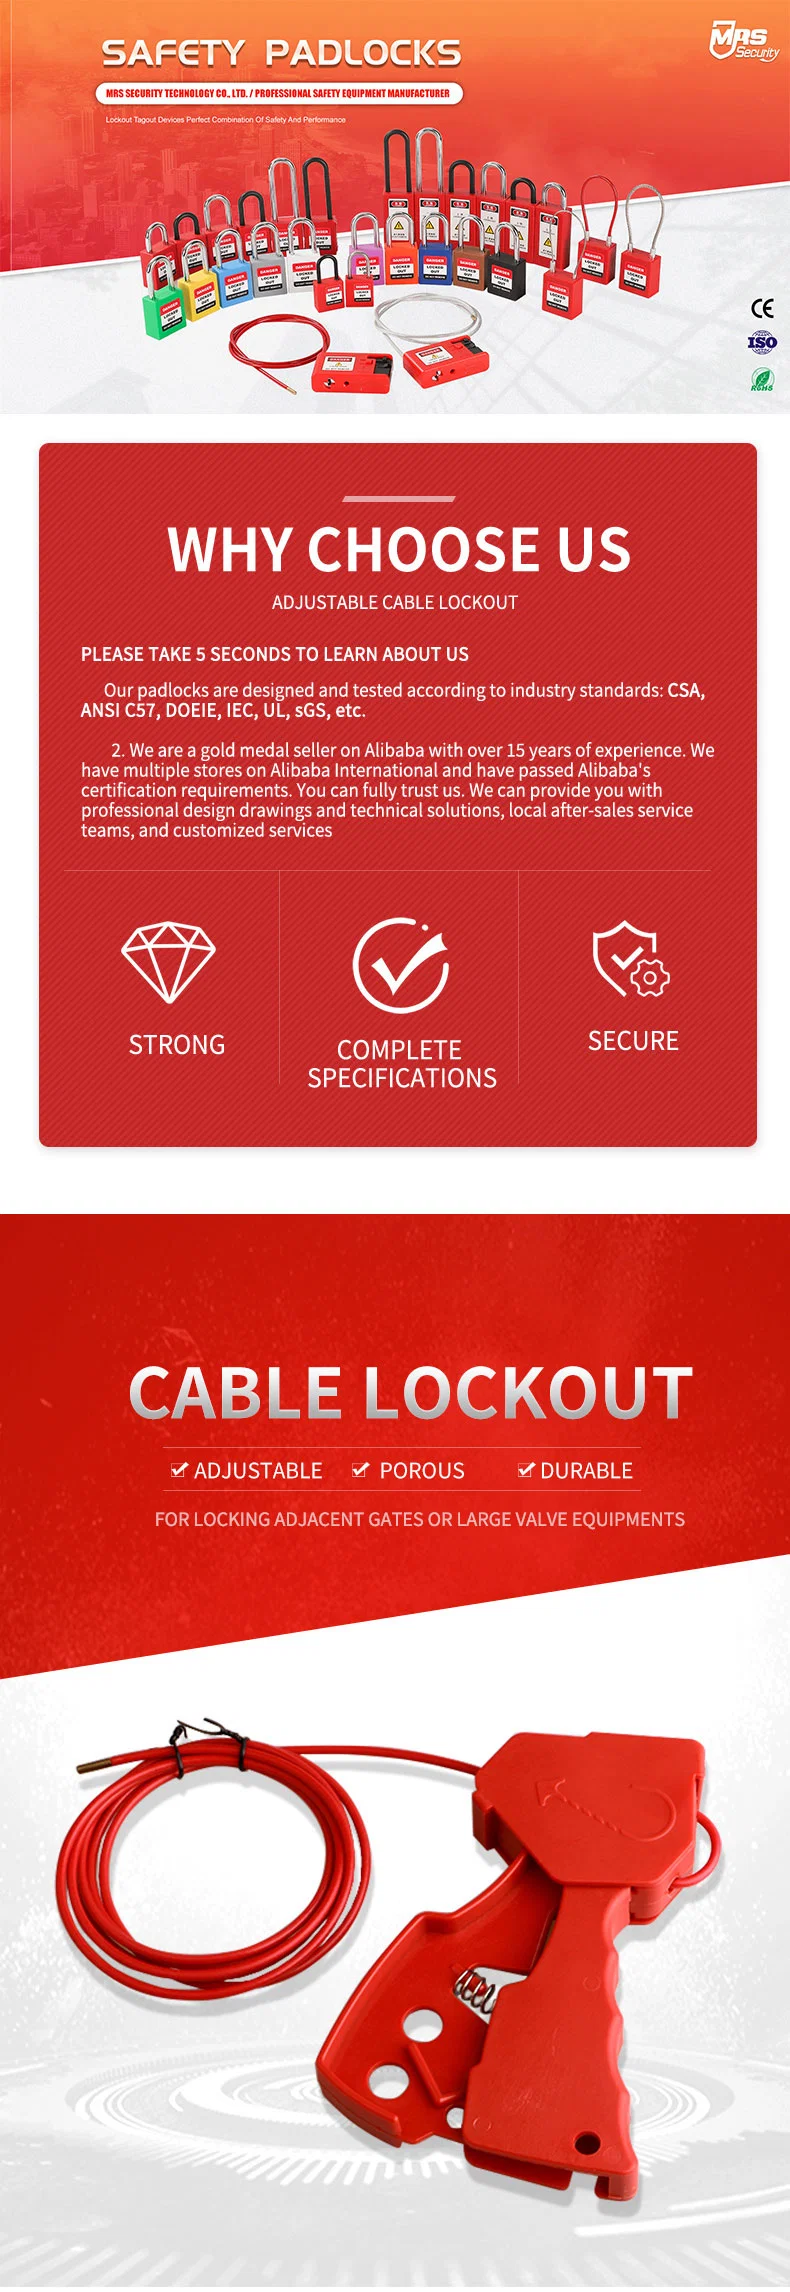 Steel Wrapped in PVC Cable Safety Lockout Tagout Loto Safe Lock Manufacturer